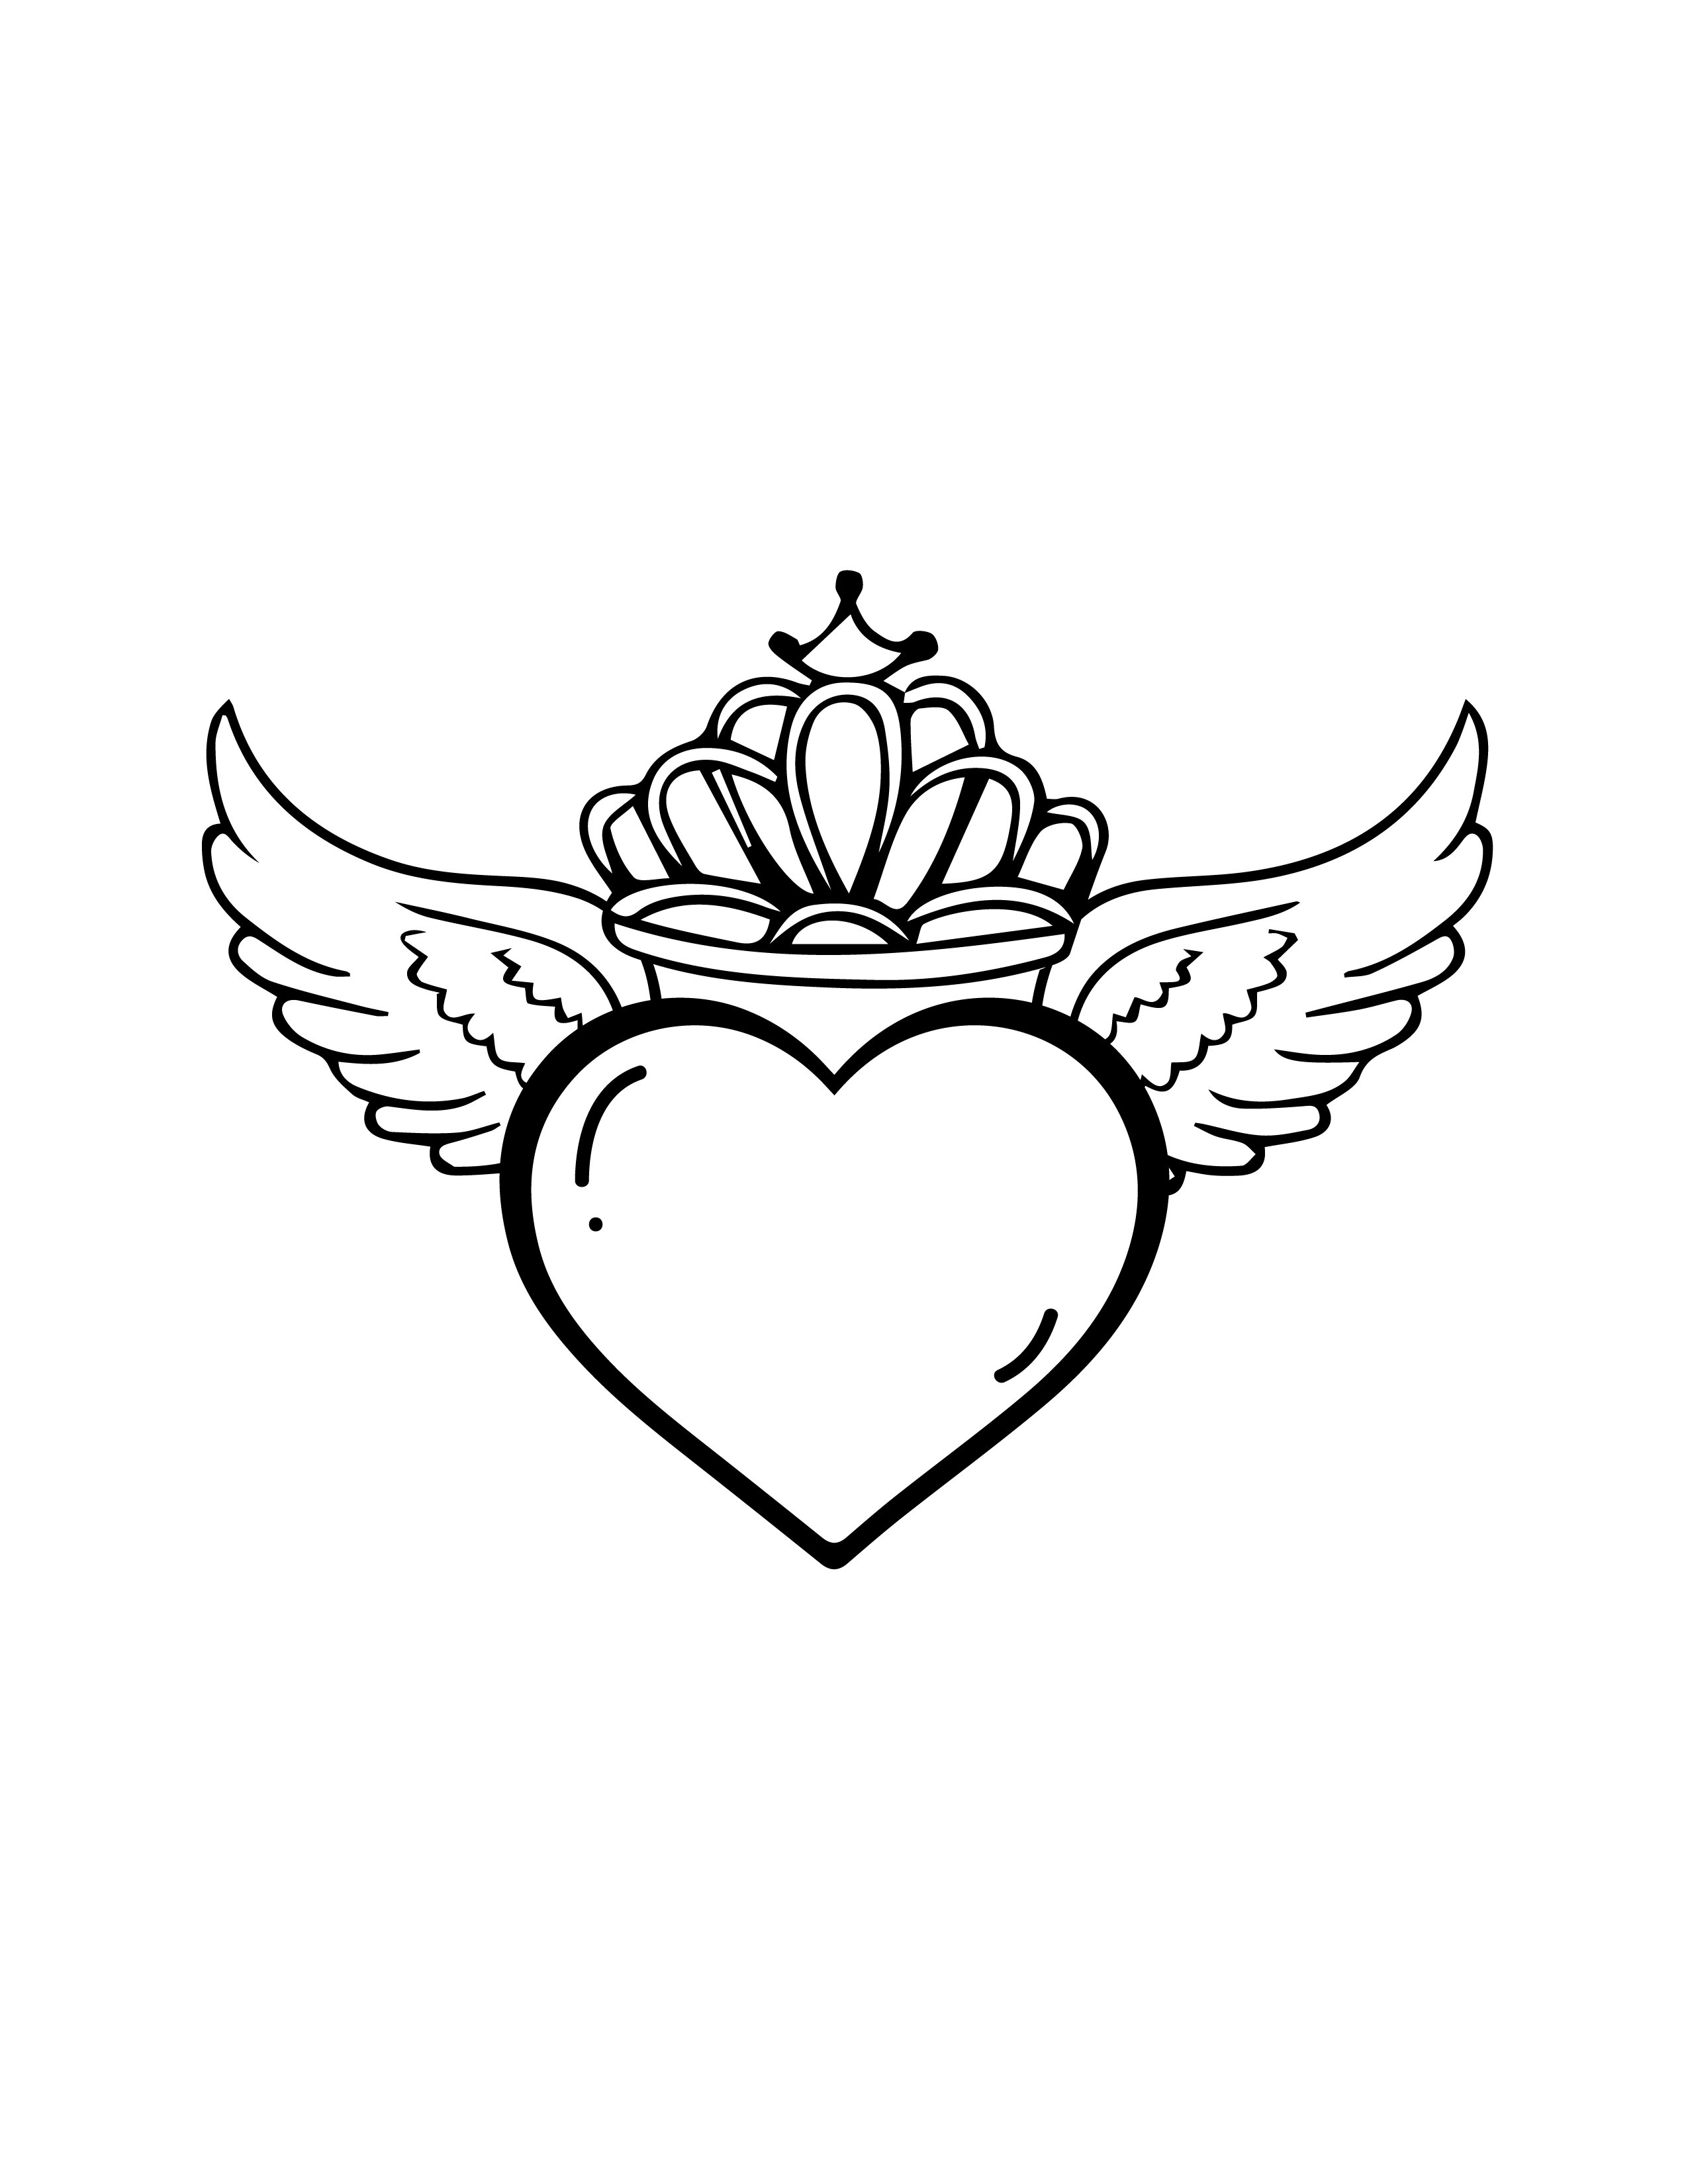 Free Cartoon Heart With Wings Drawing - Download in PDF, Illustrator ...